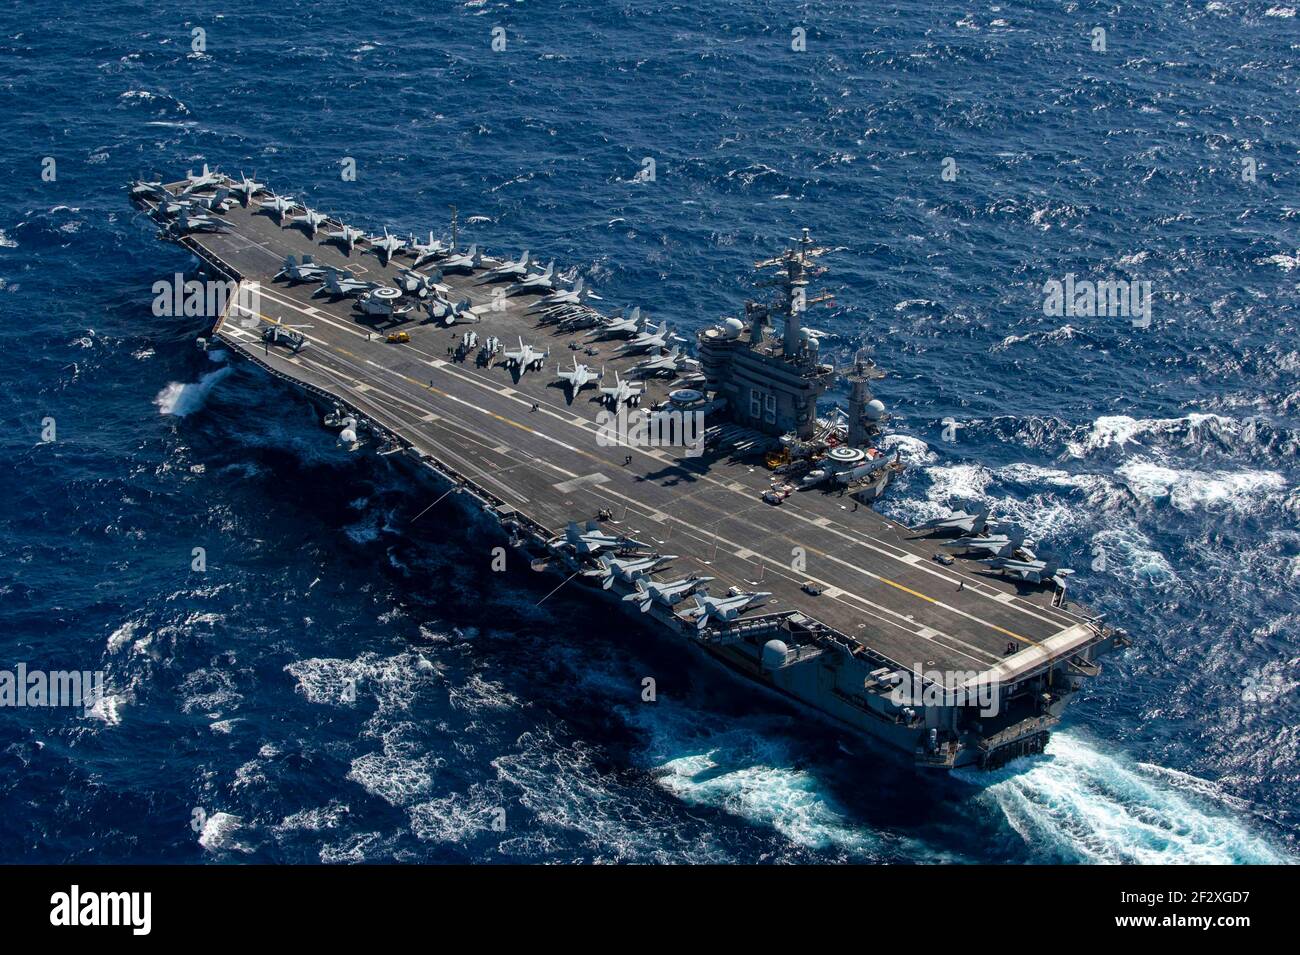 The U.S. Navy Nimitz-class aircraft carrier USS Dwight D. Eisenhower transits the Mediterranean Sea on a routine deployment in the U.S. 6th Fleet area of operations March 11, 2021 in the Mediterranean Sea. Stock Photo